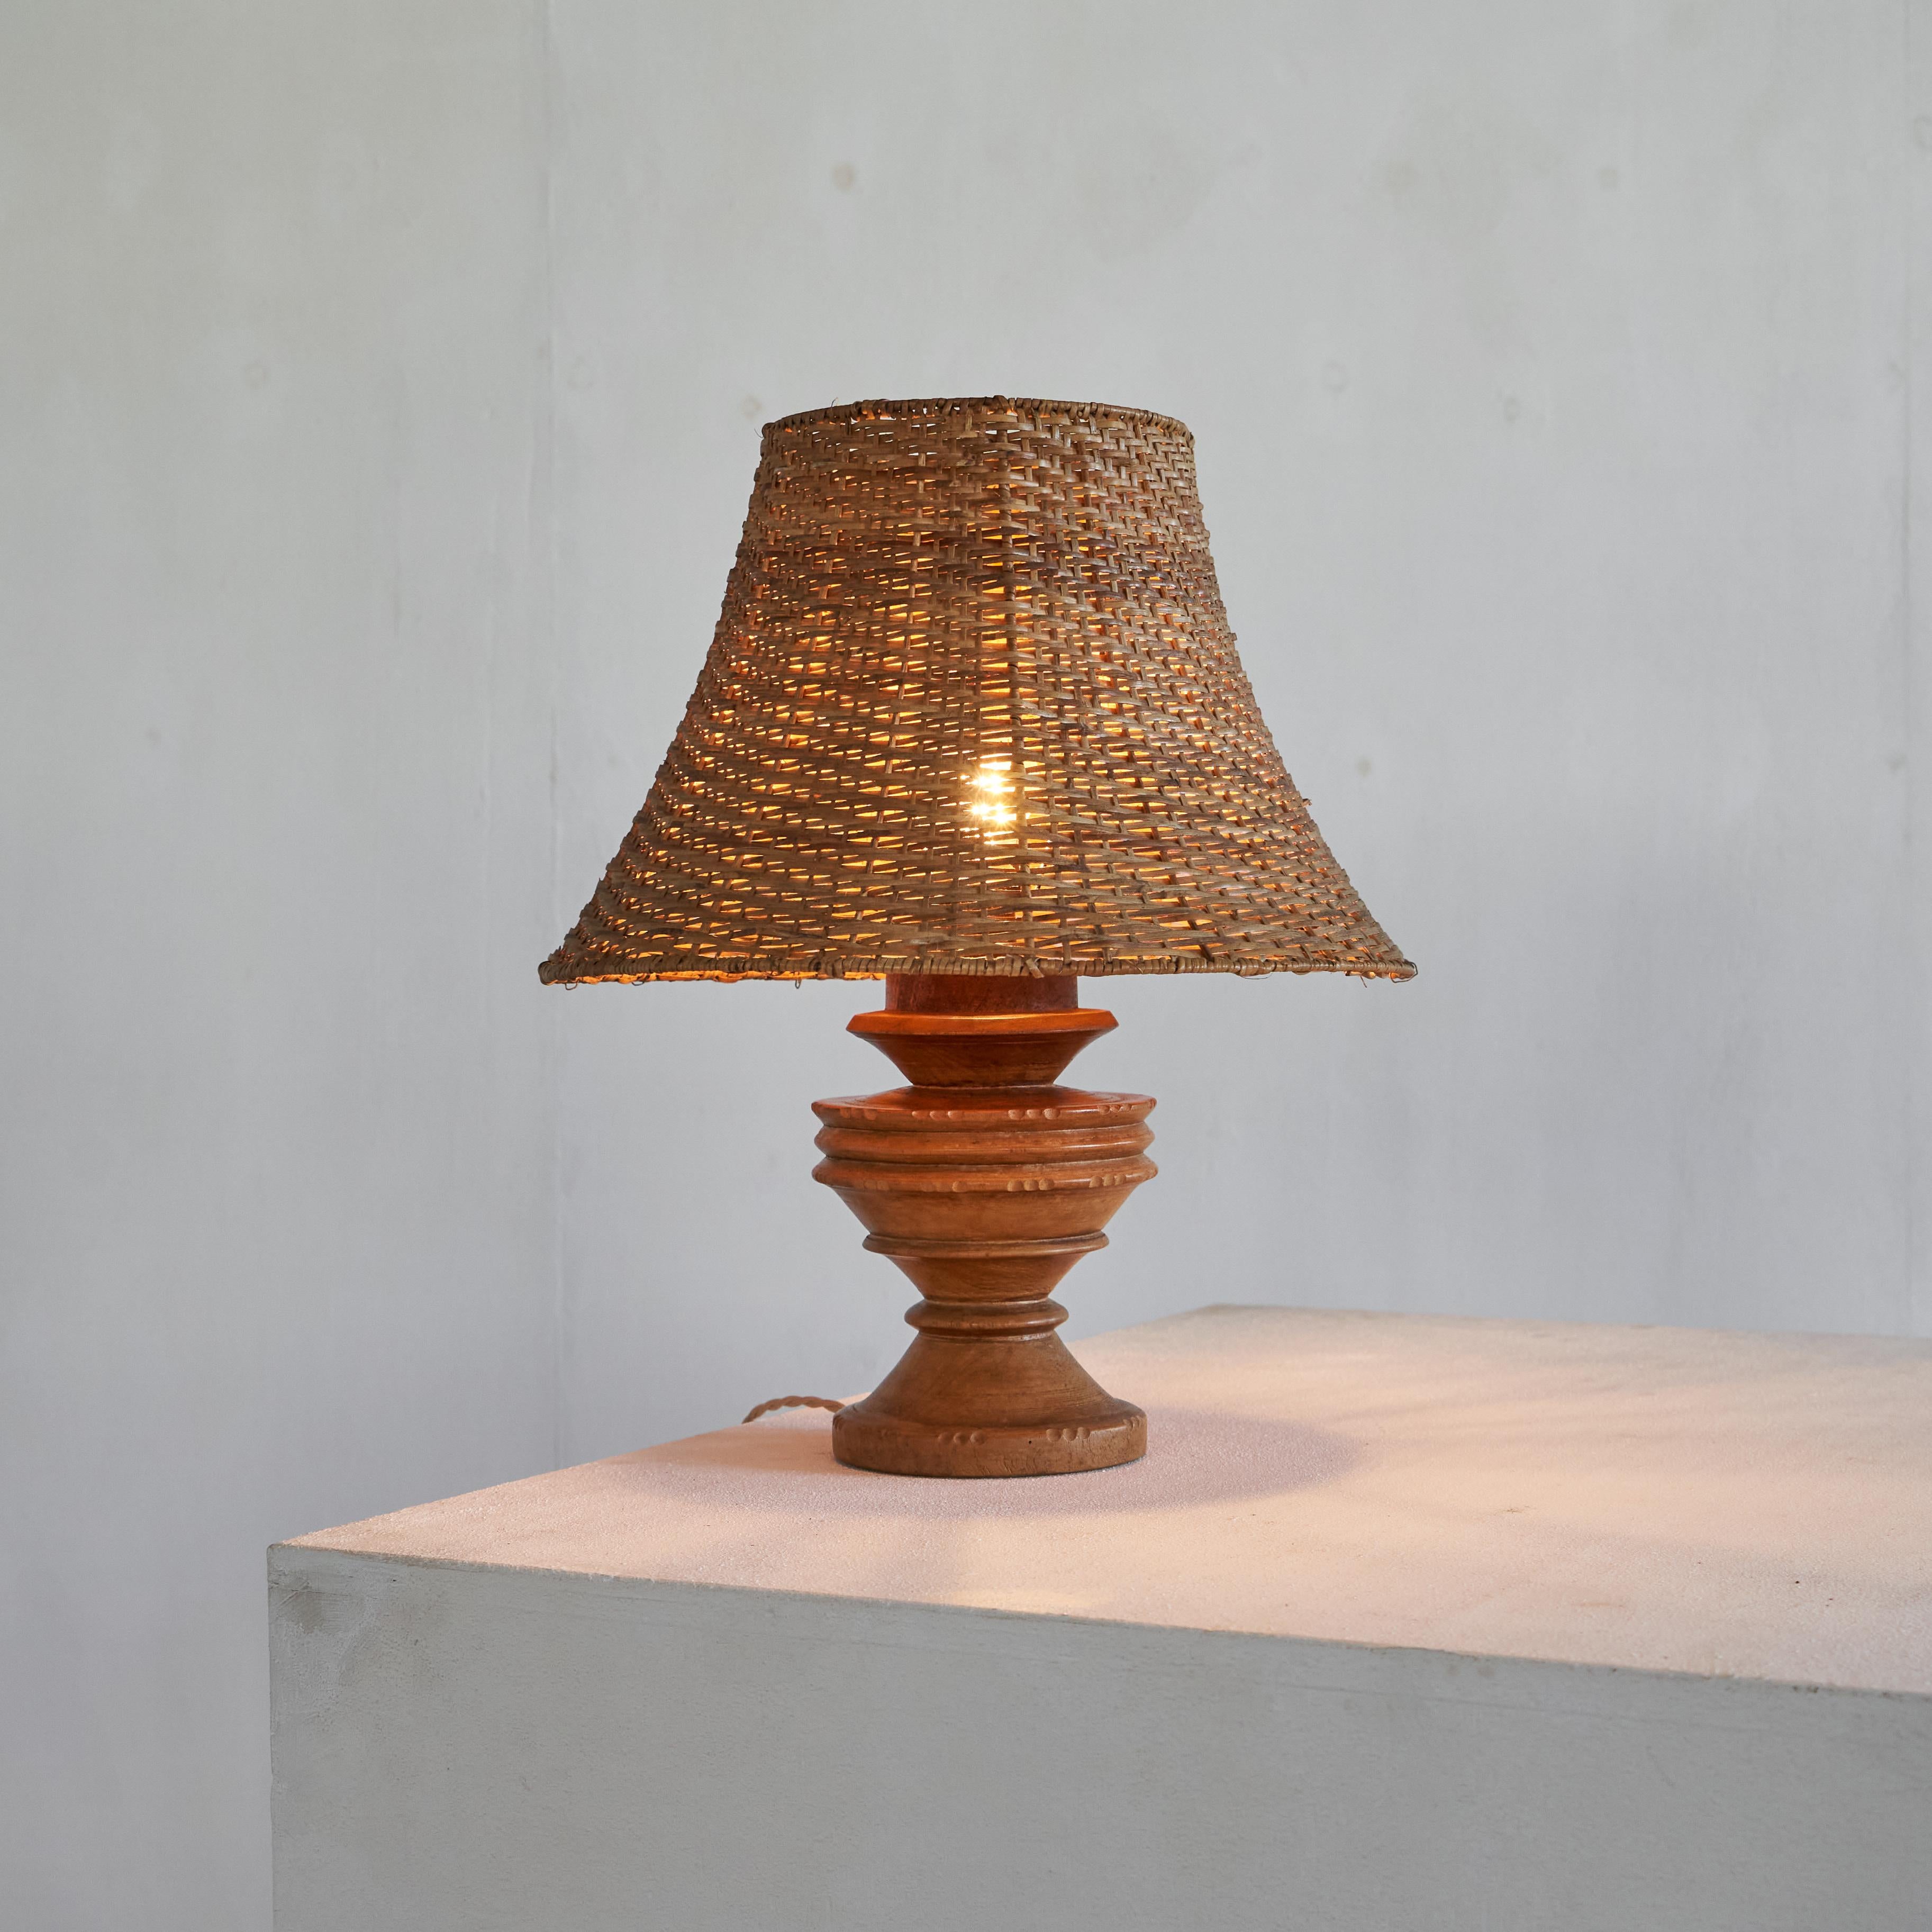 Wabi Sabi Antique Table Lamp in Turned Wood and Rattan, early 20th century.

Beautiful and timeless wabi sabi table lamp in turned and carved wood with a nice vintage rattan shade. Great shape and carved details - looks a bit like the works by